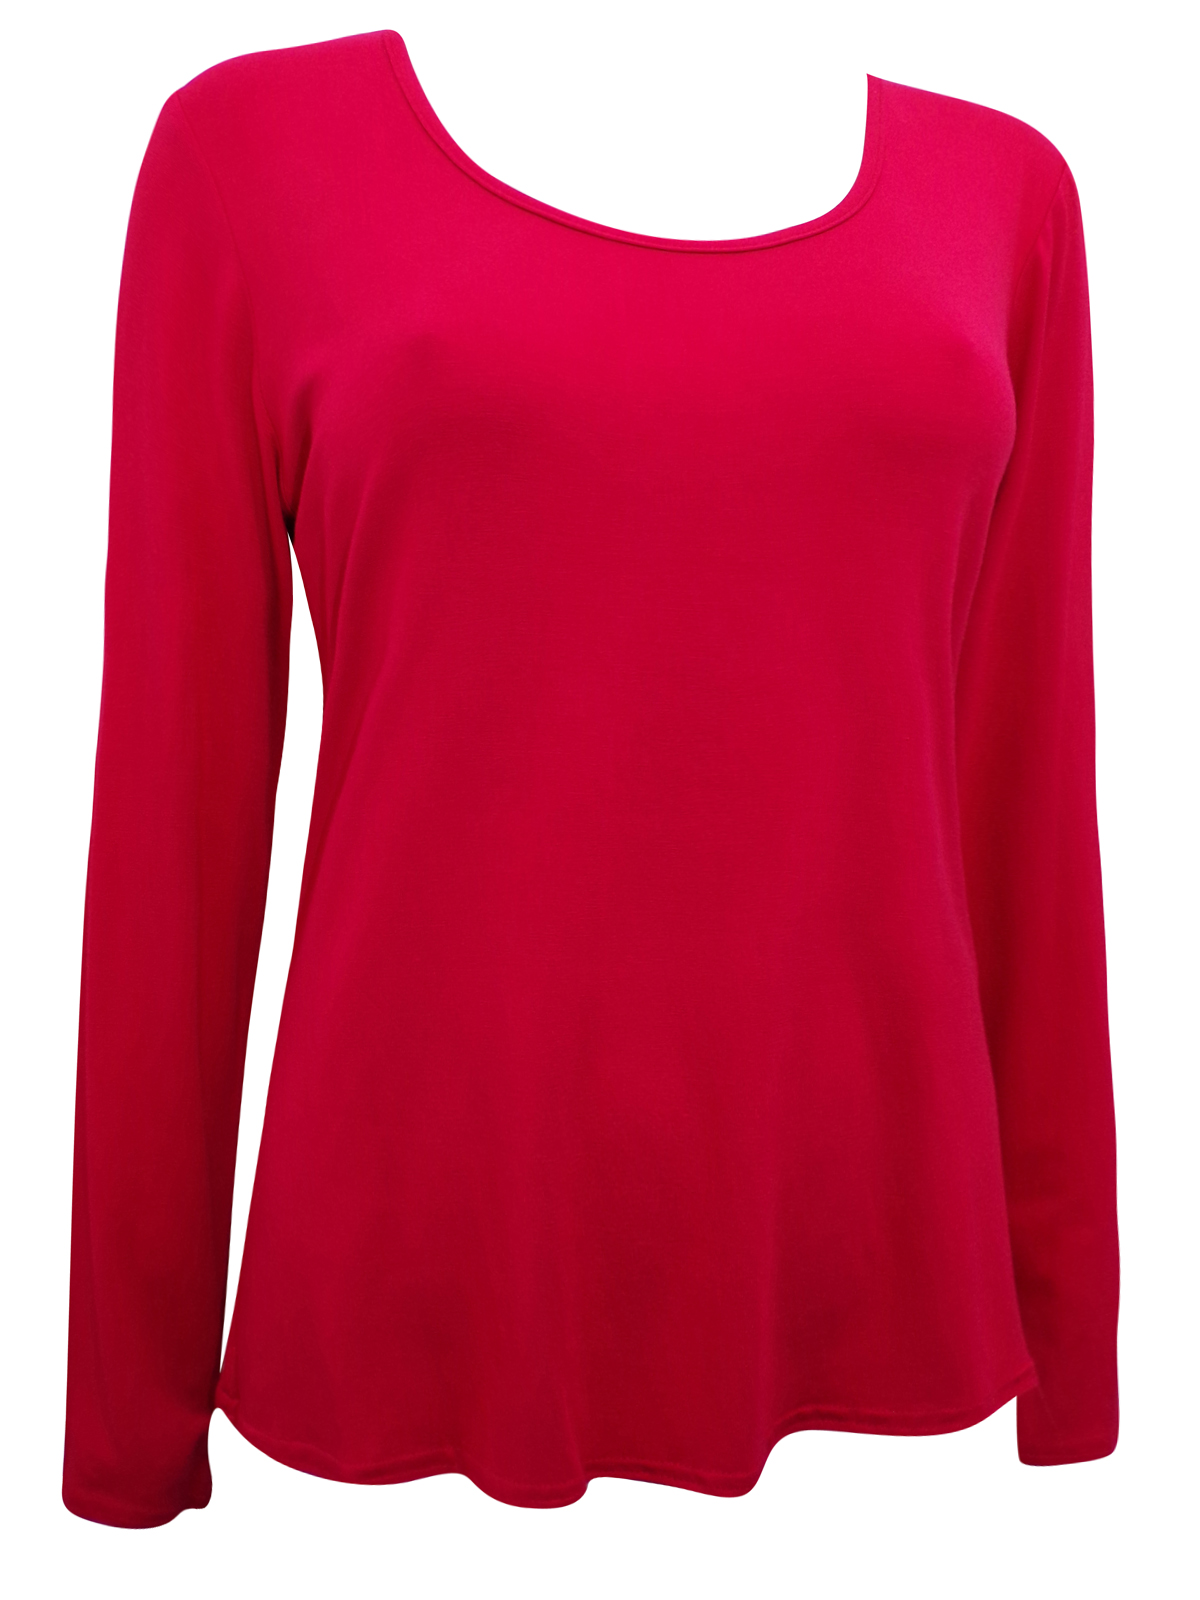 First Avenue RED Long Sleeve Jersey Top - Size Small to XLarge